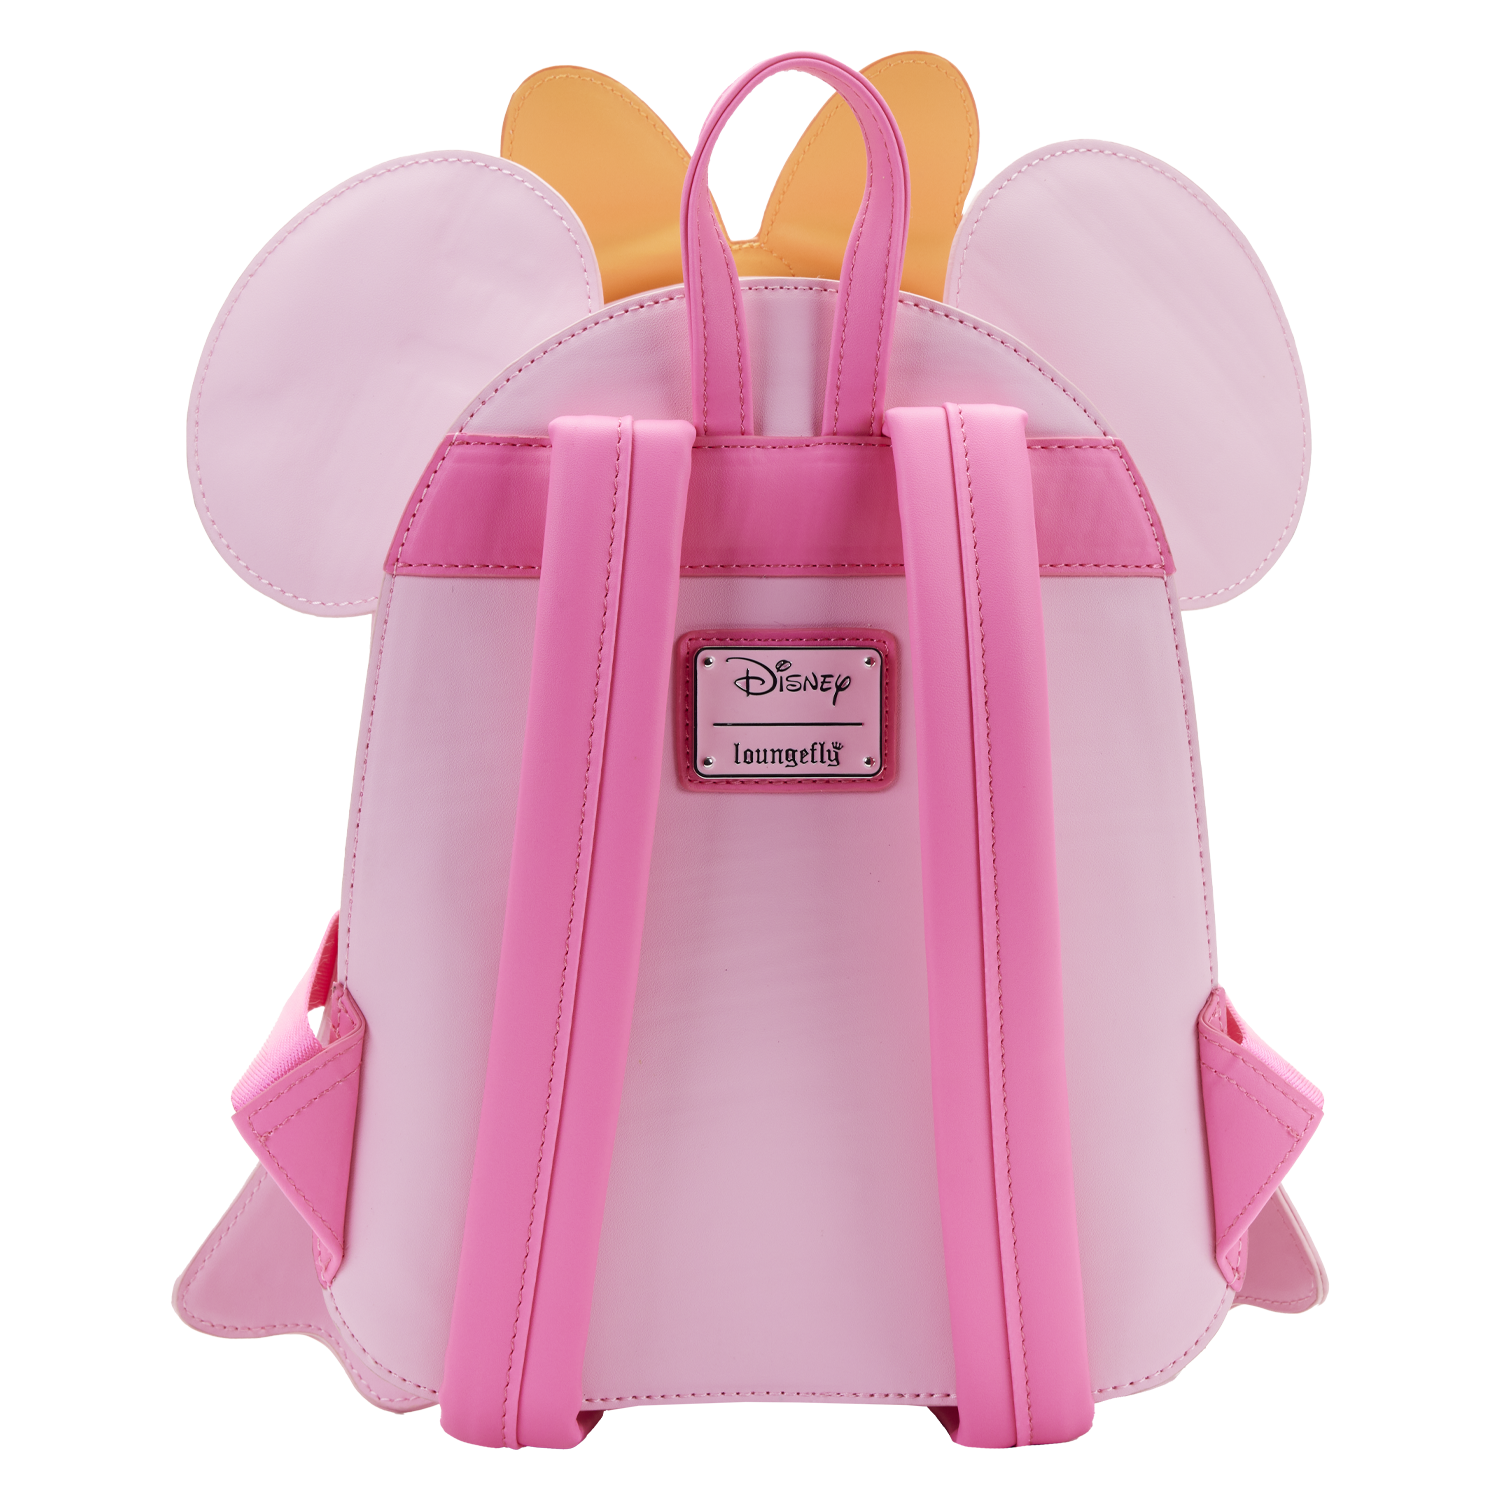 Buy Minnie Mouse Candy Corn Cosplay Mini Backpack at Loungefly.